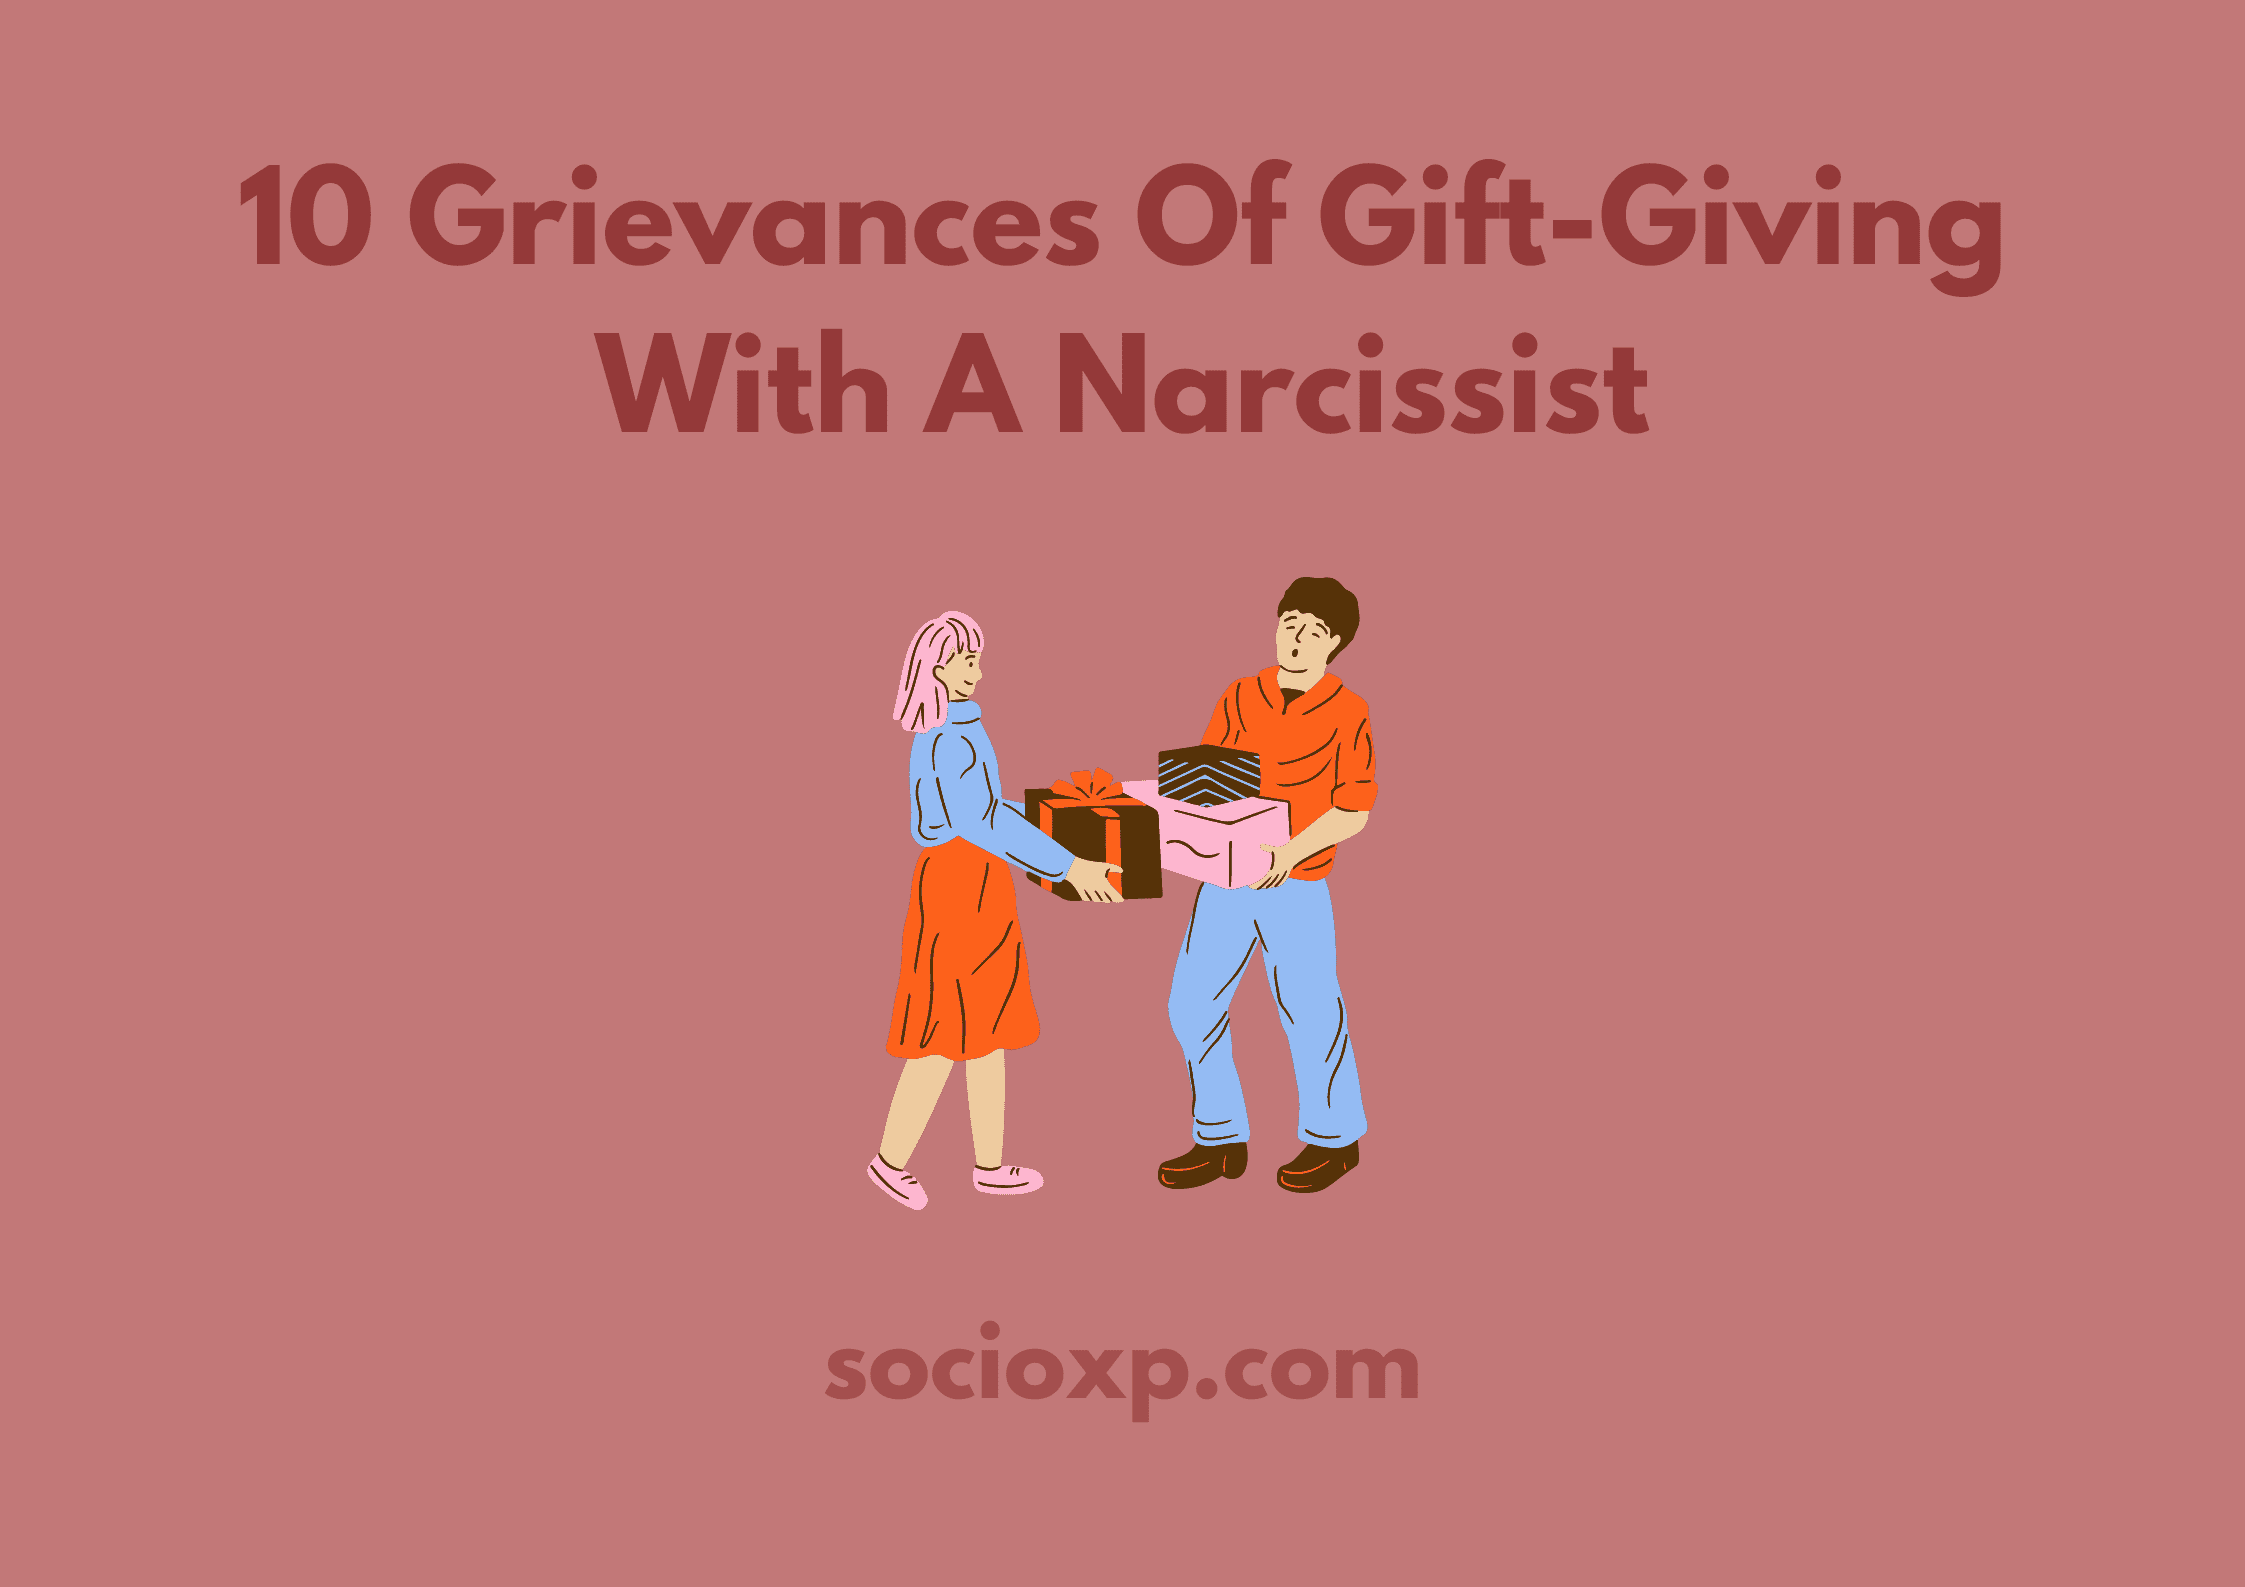 10 Grievances Of Gift-Giving With A Narcissist